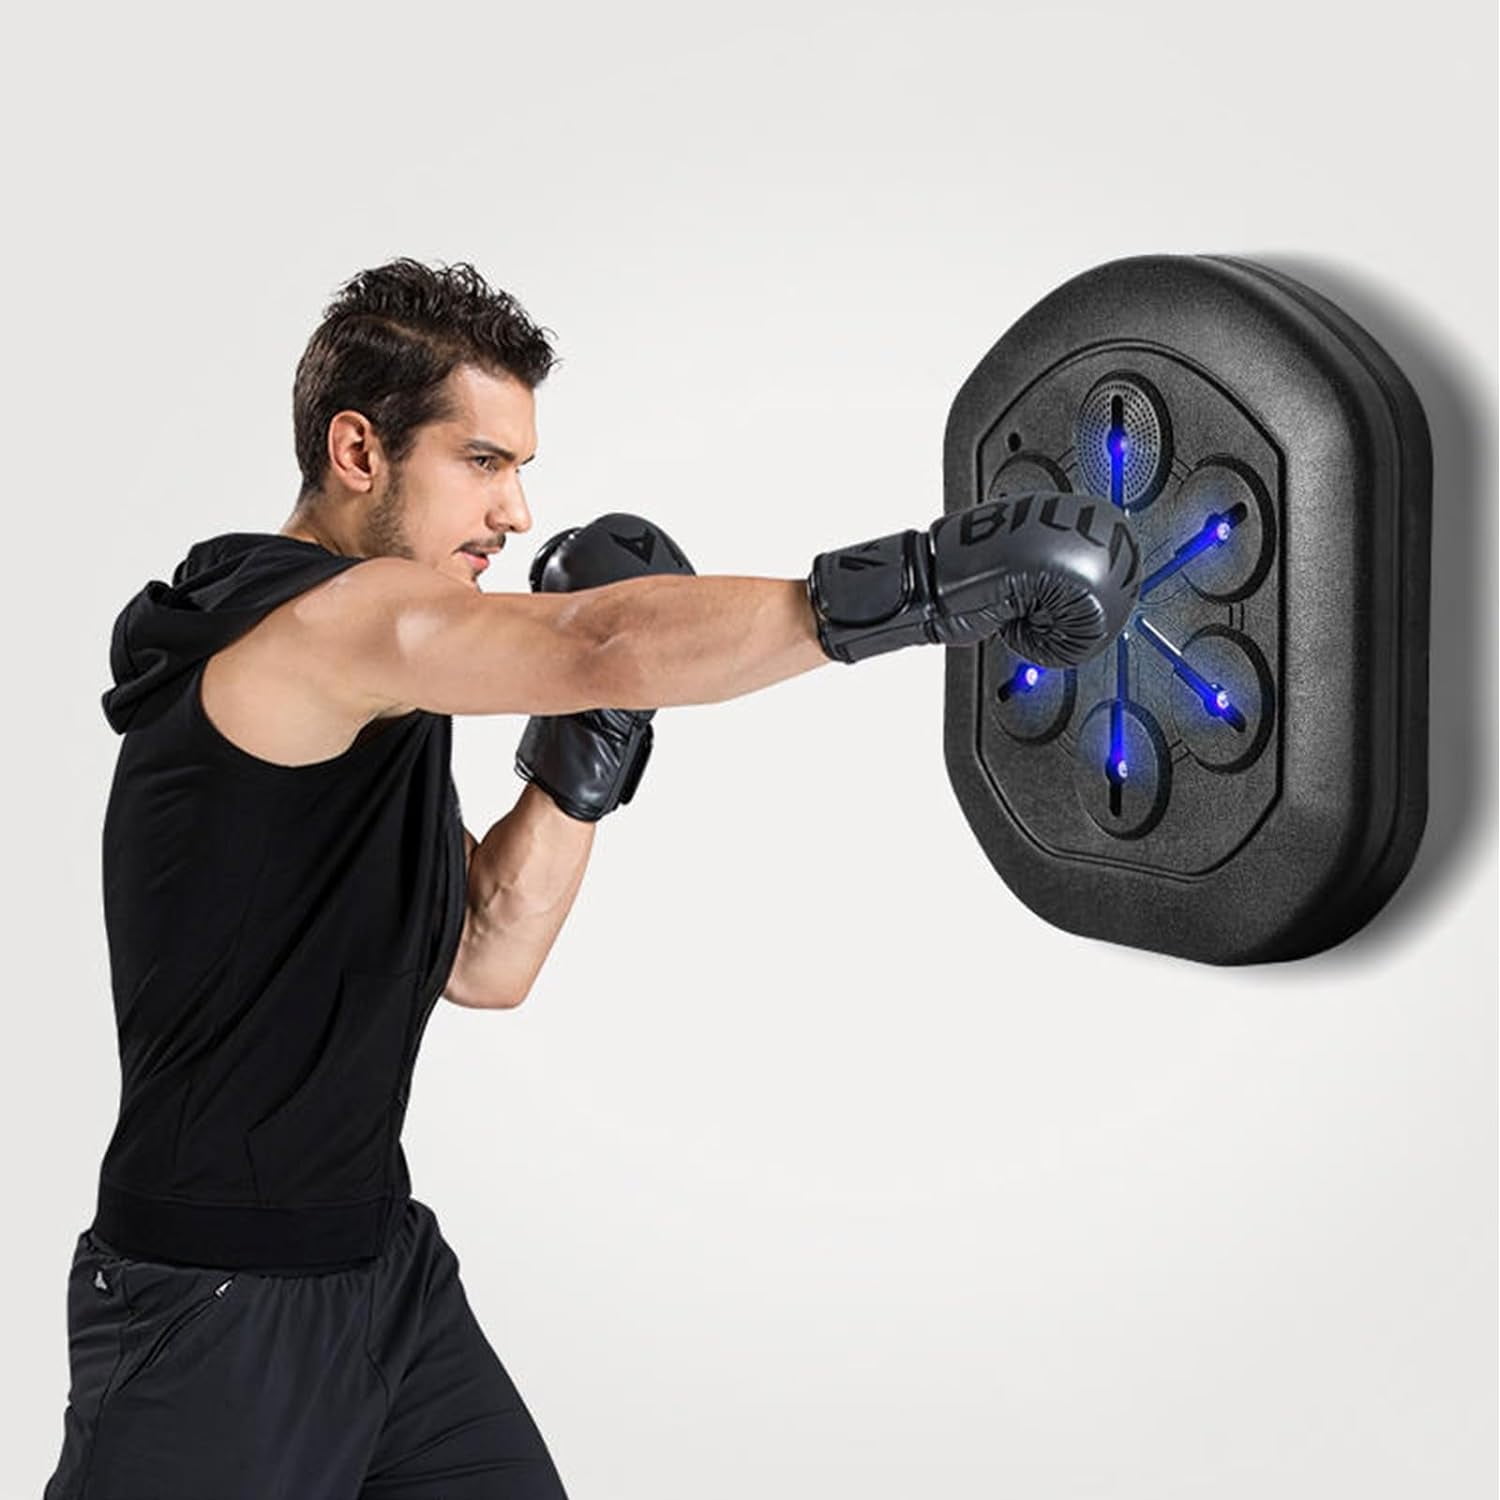 Electronic Wall Target Boxing Machine With Music And Wrecking Punching Bag  For Home Fitness HKD230720 From Musuo10, $64.73